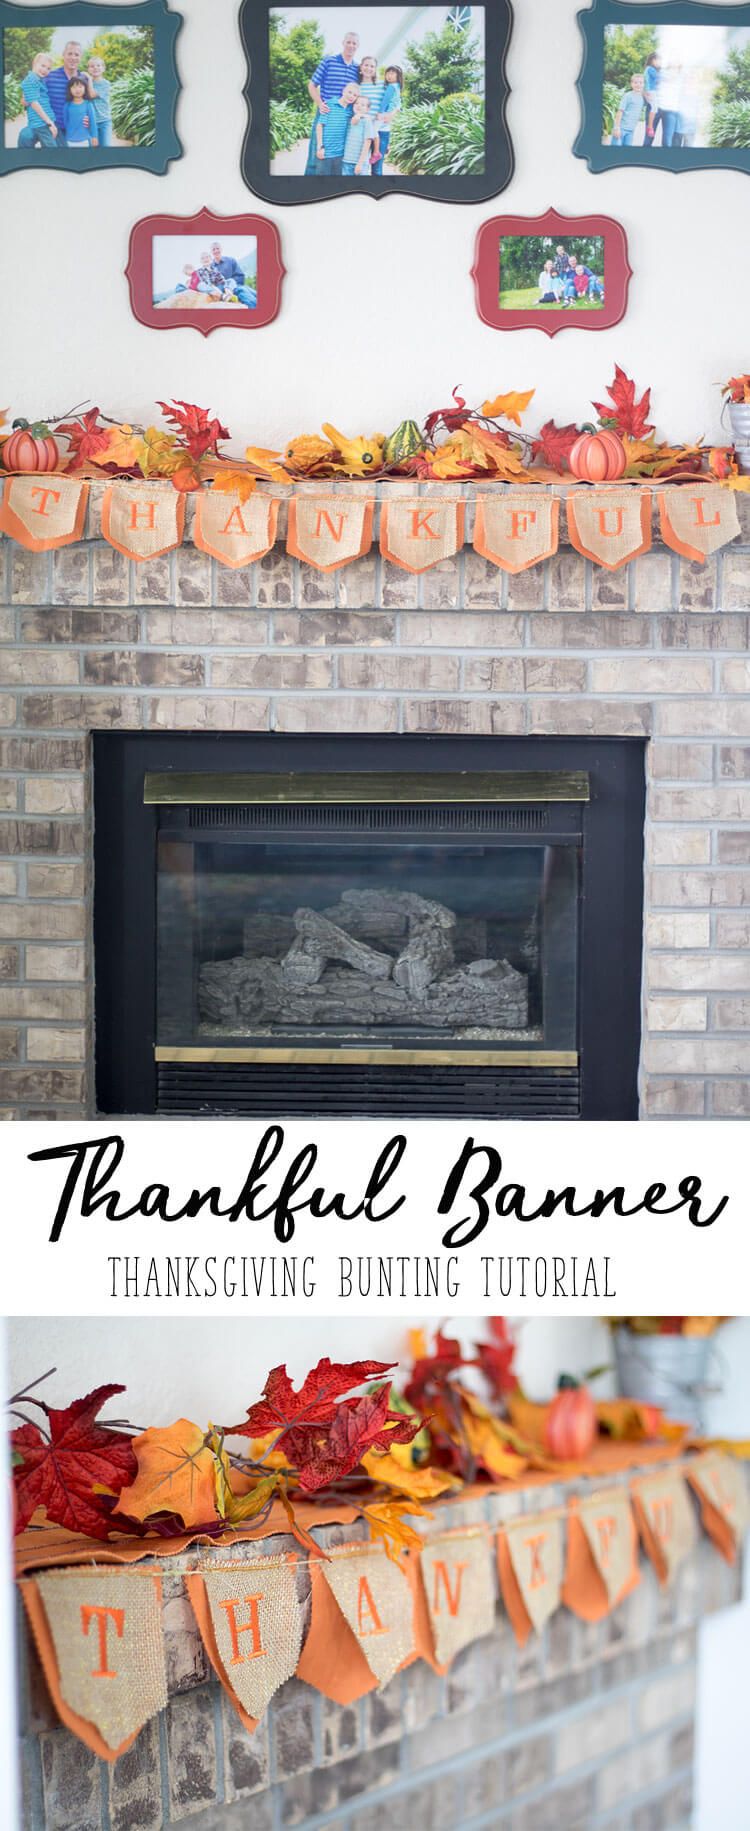 Kerns Fireplace Awesome Thankful Banner A Thanksgiving Bunting Tutorial From Life